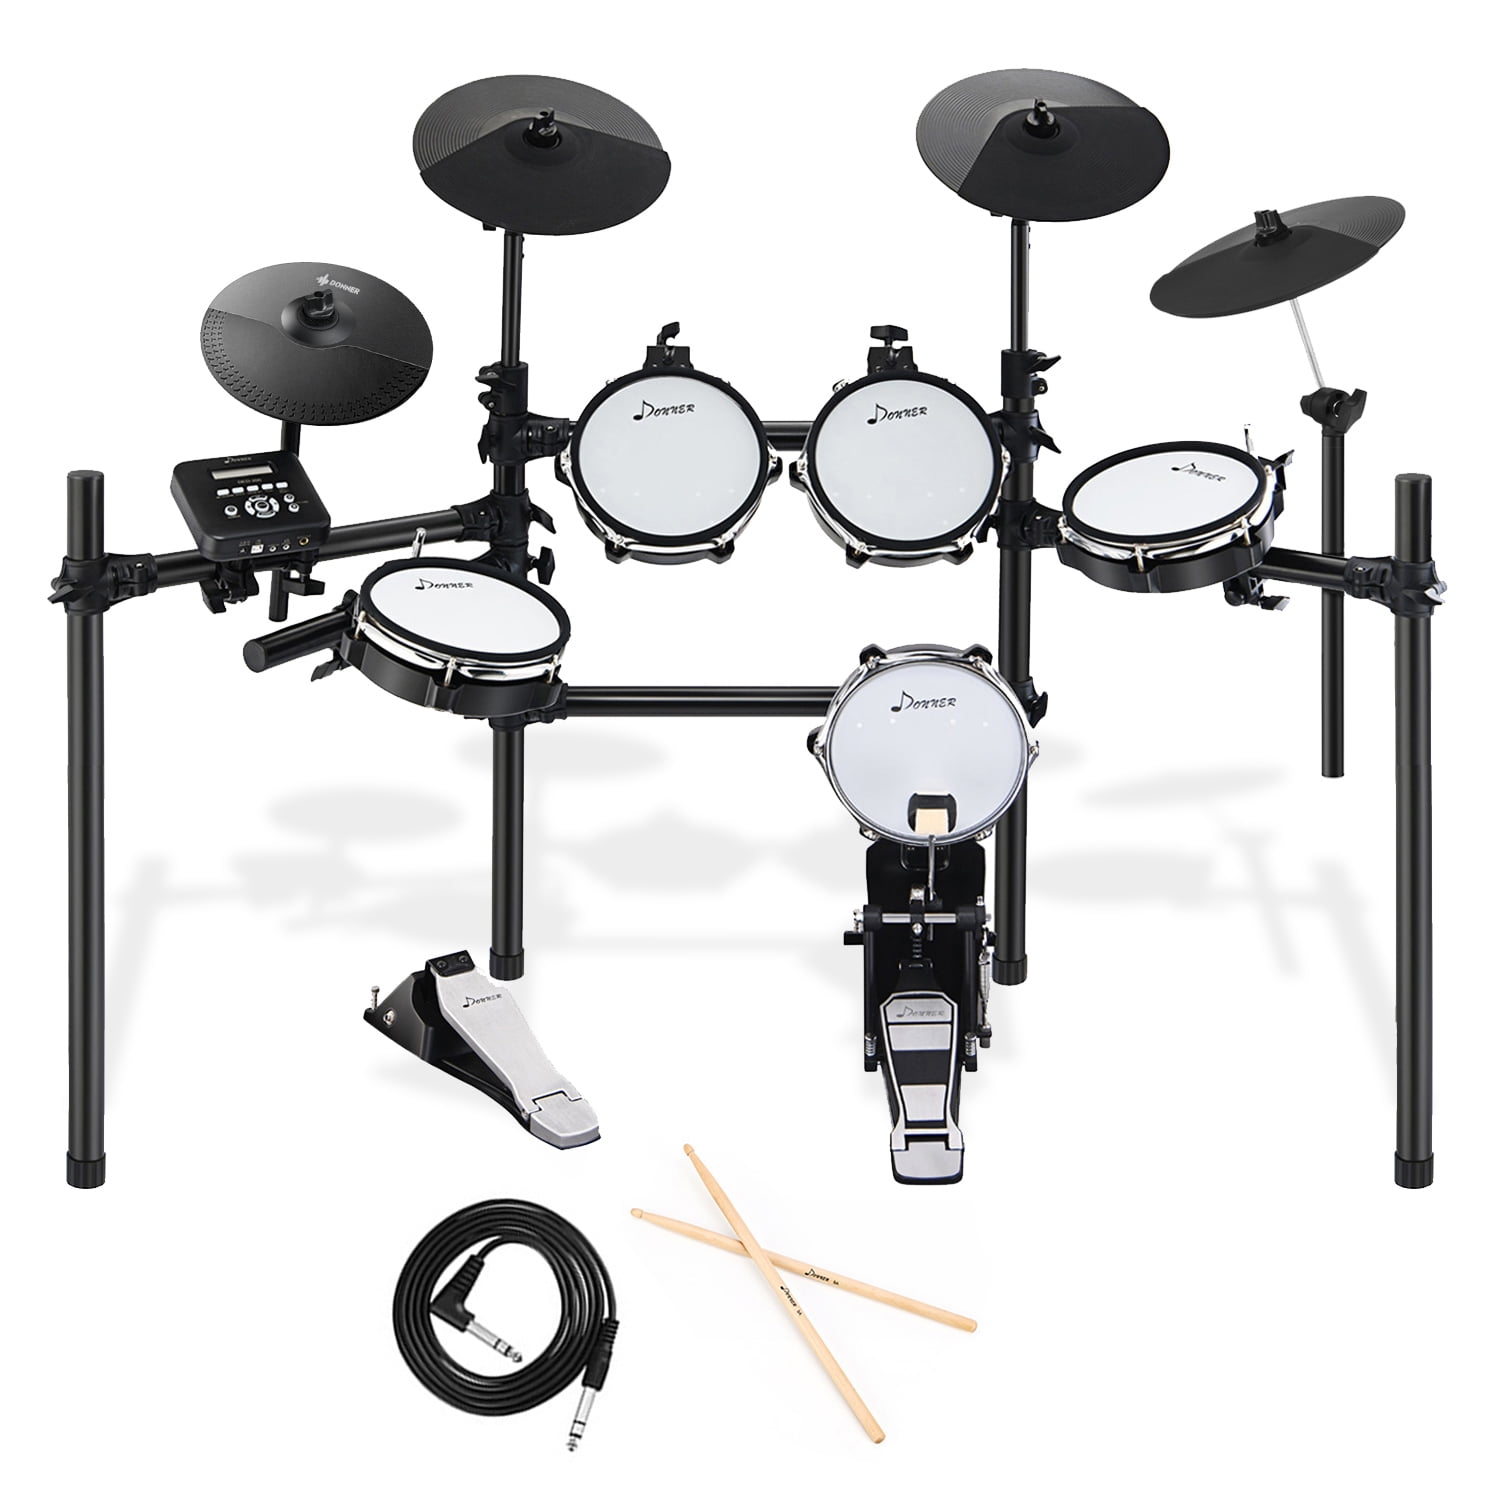 Sticks Headphone and Audio Cable Included More Stable Iron Metal Support Set Donner DED-200 Electric Kit Electronic with Mesh Head 8 Piece Drum Throne 